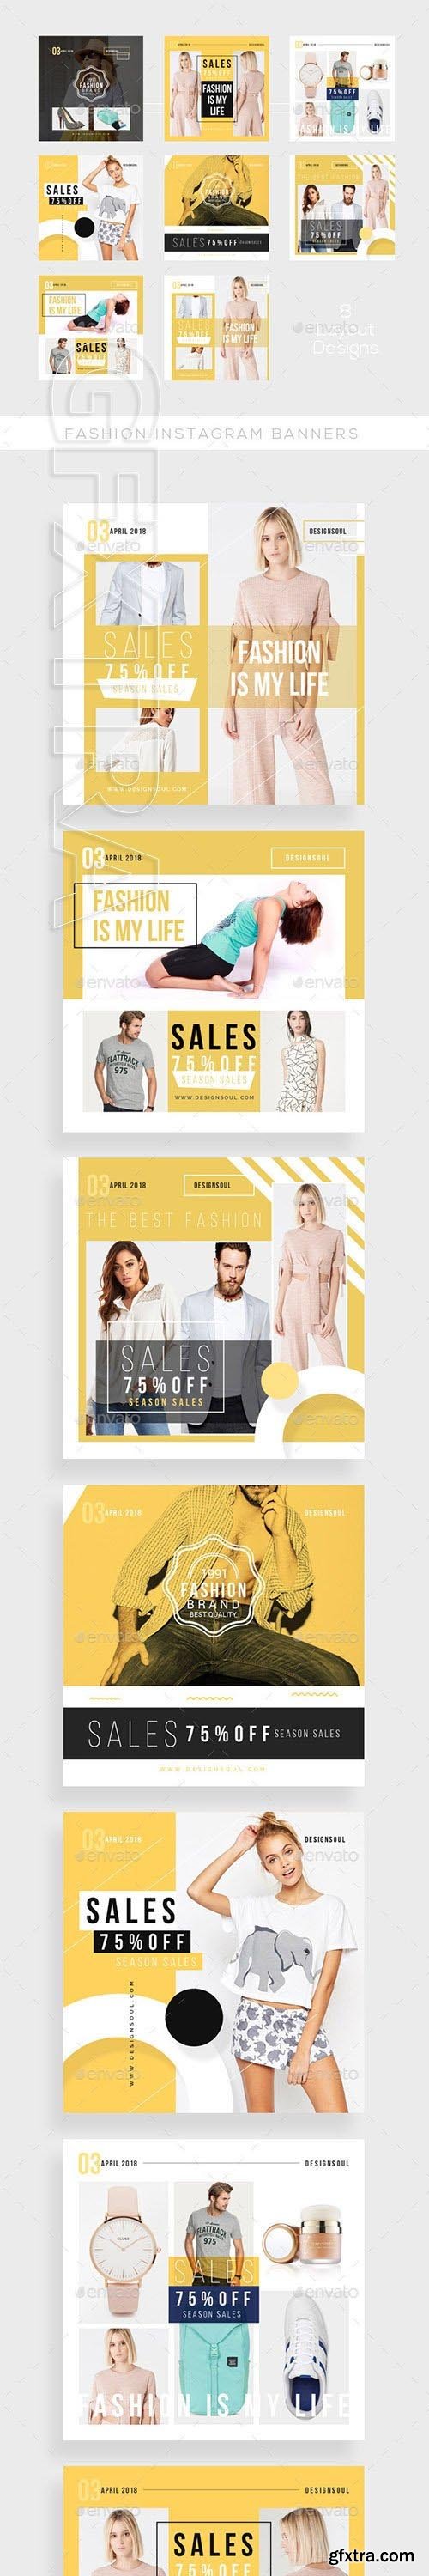 GraphicRiver - Fashion Instagram Banners 21159148